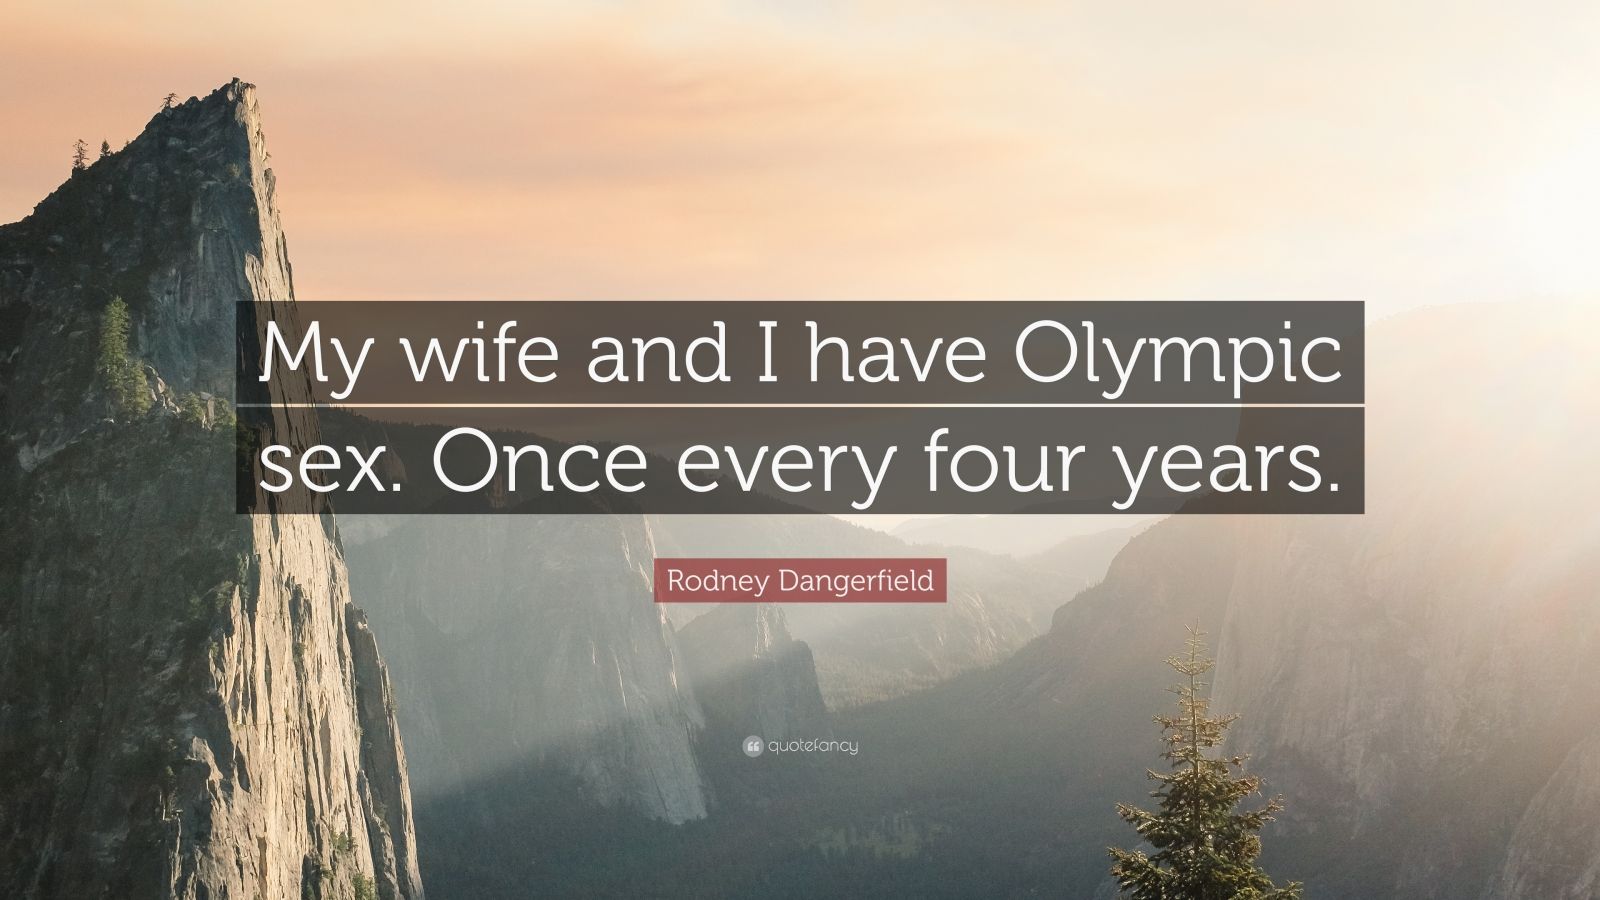 Rodney Dangerfield Quote “my Wife And I Have Olympic Sex